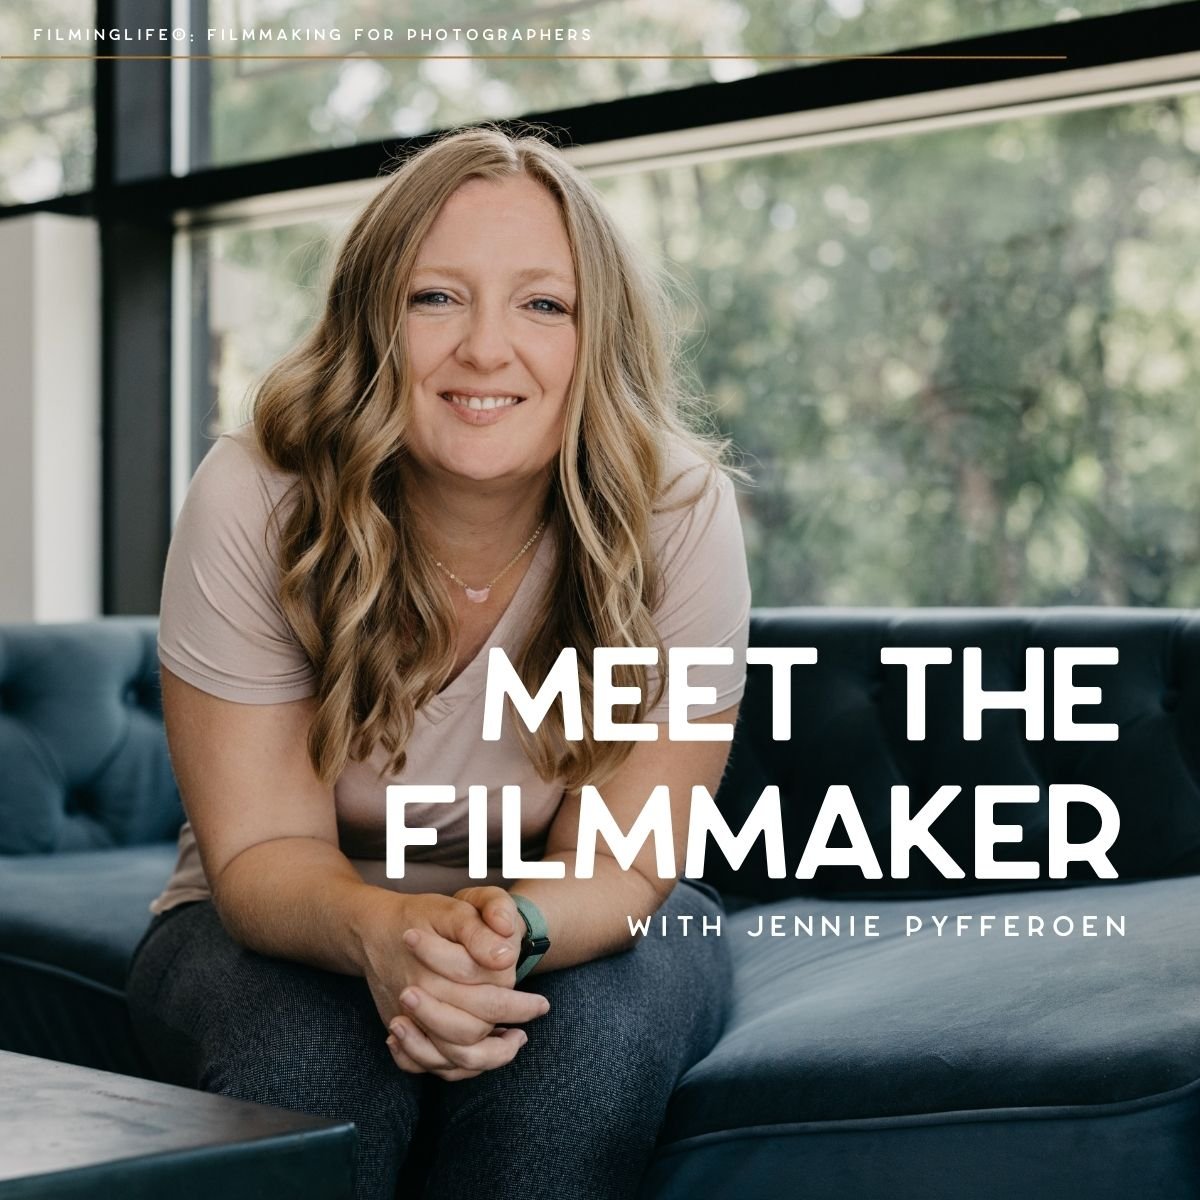 Nashville Family Filmmaker & Photographer Jennie Pyfferoen sits on a lounge, leaning forward with her hands clasped, smiling at the camera. She has blonde hair and is wearing jeans, a light coloured t-shirt and a gold necklace.